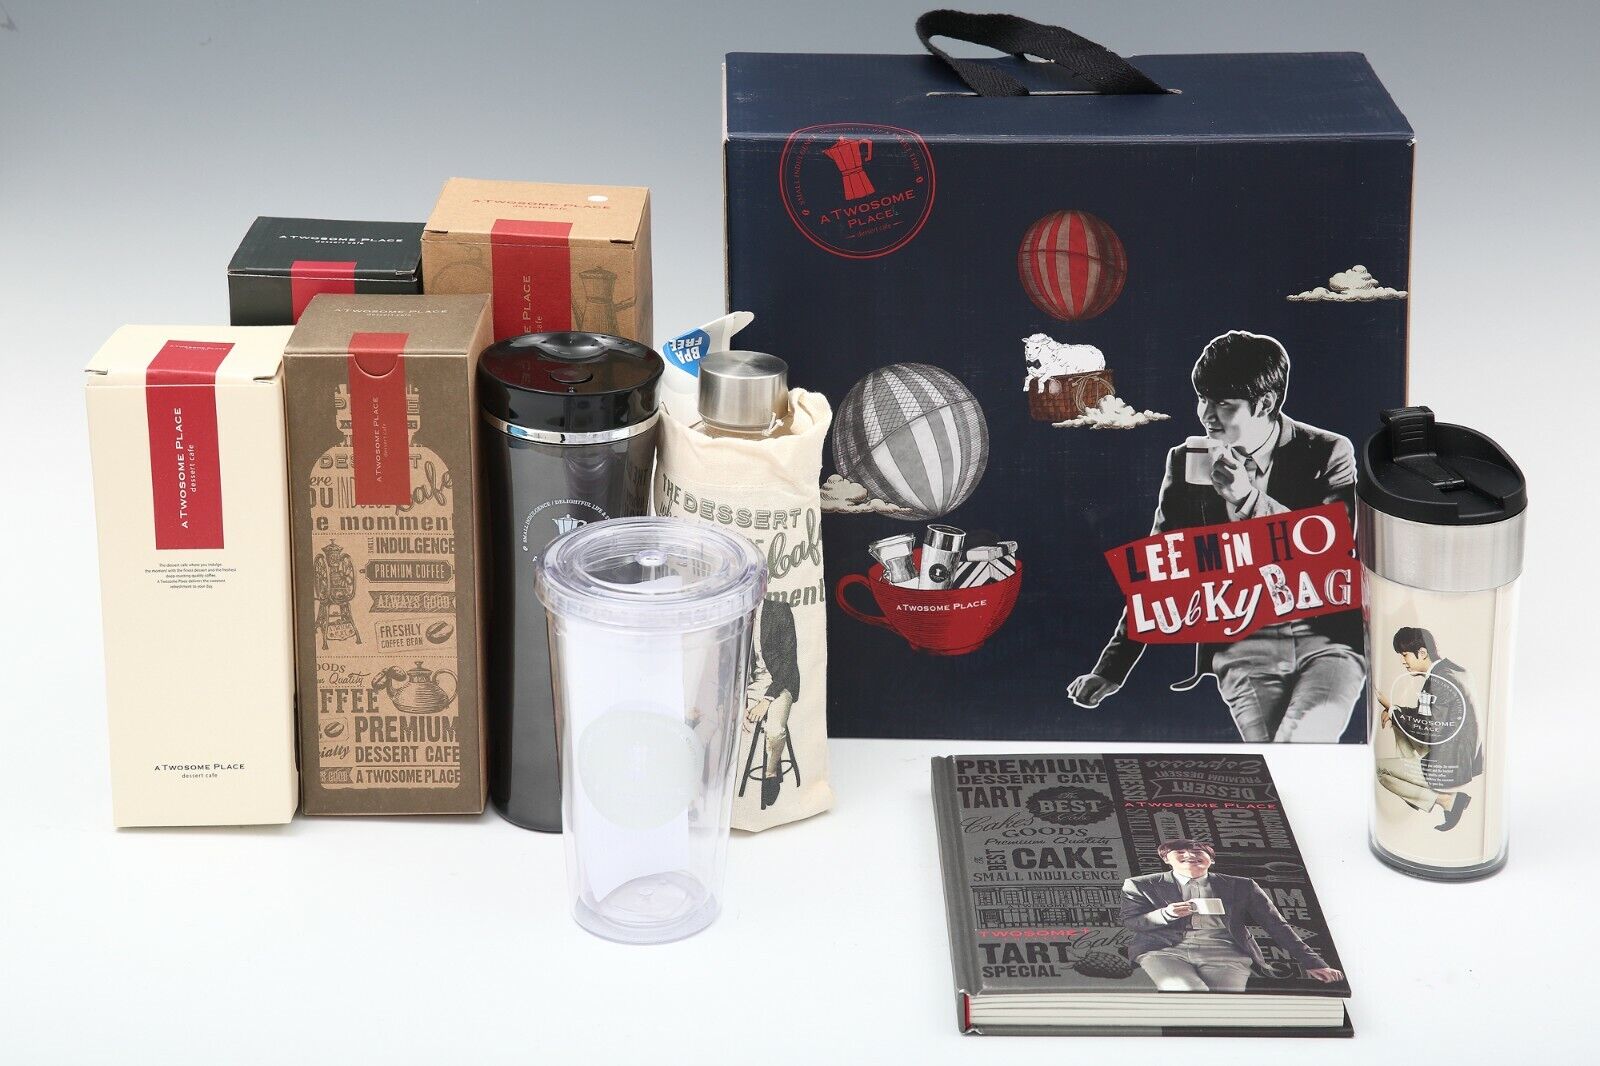 Lee Min Ho White Coffee Merchandise 2015 A Twosome Place Full Package